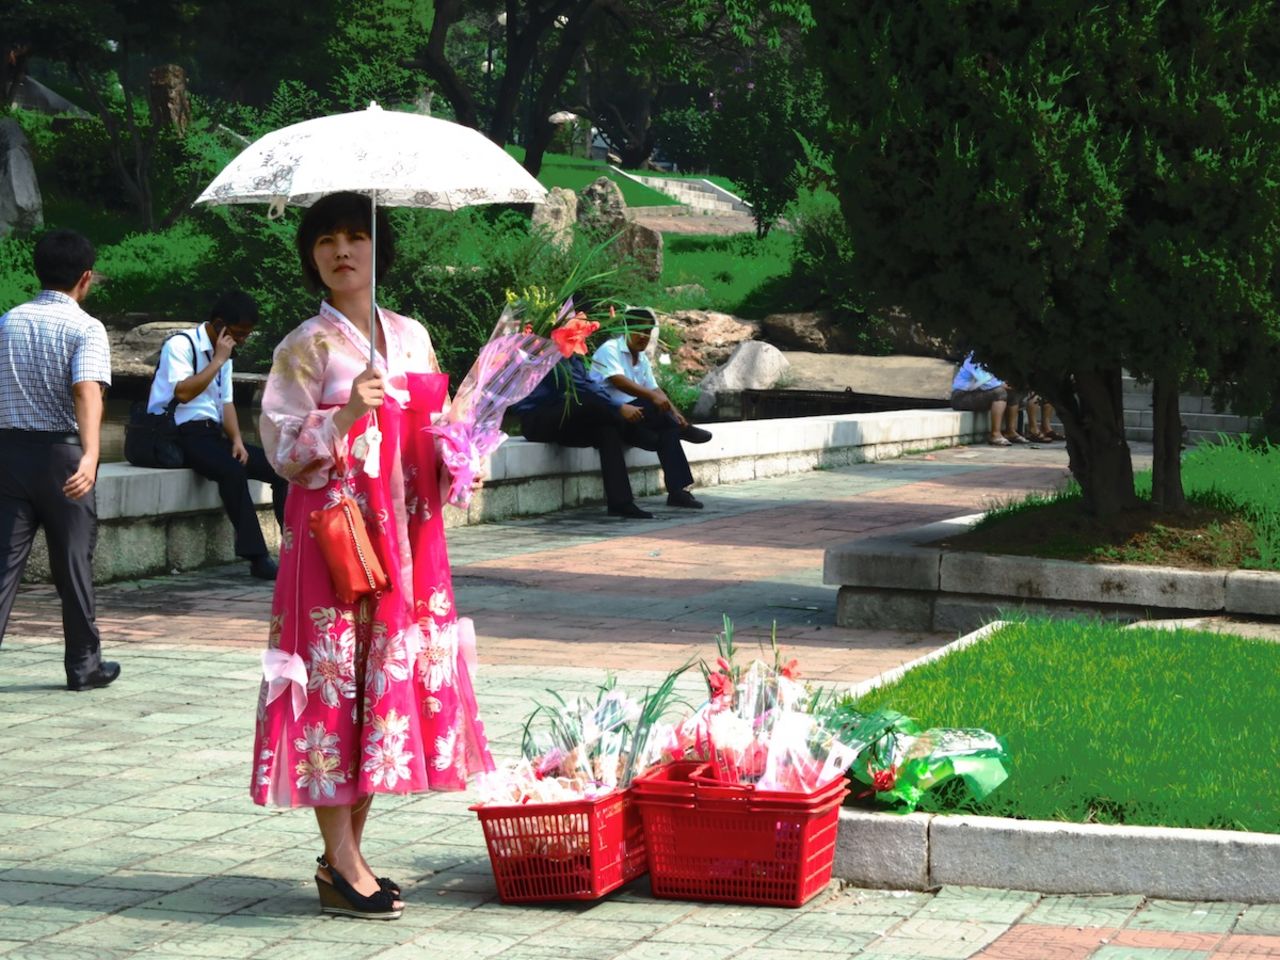 A flower vendor beside a Kim Il Sung statue in Pyongyang sells bouquets of flowers to locals and tourists to lay at the foot of the statue.